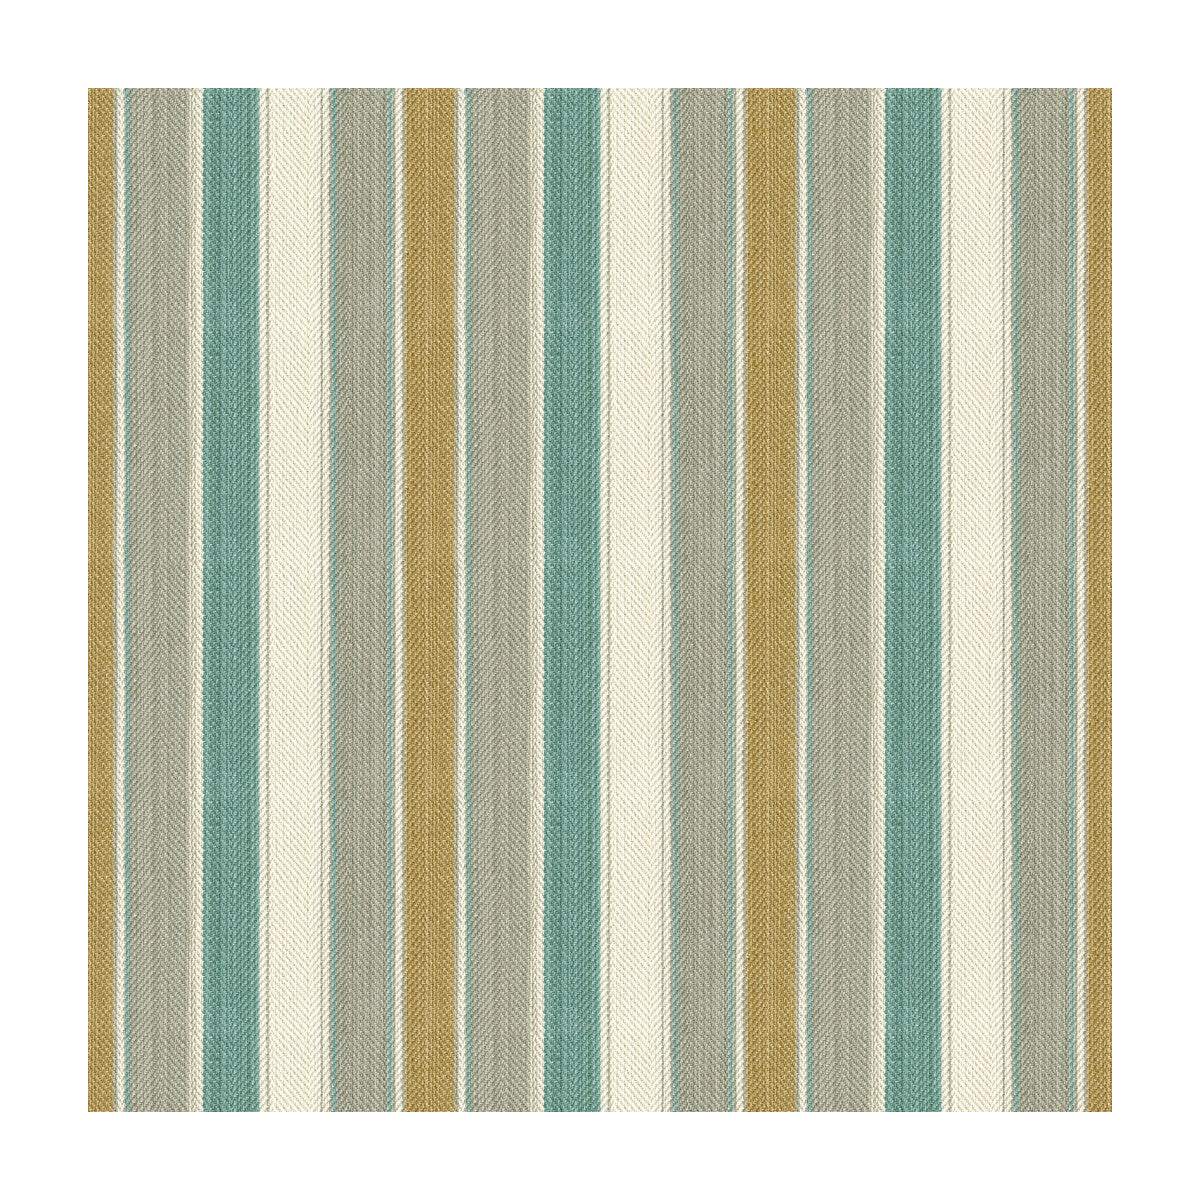 Santos Stripe fabric in mist/aqua color - pattern 8015111.1115.0 - by Brunschwig &amp; Fils in the Les Tropiques collection